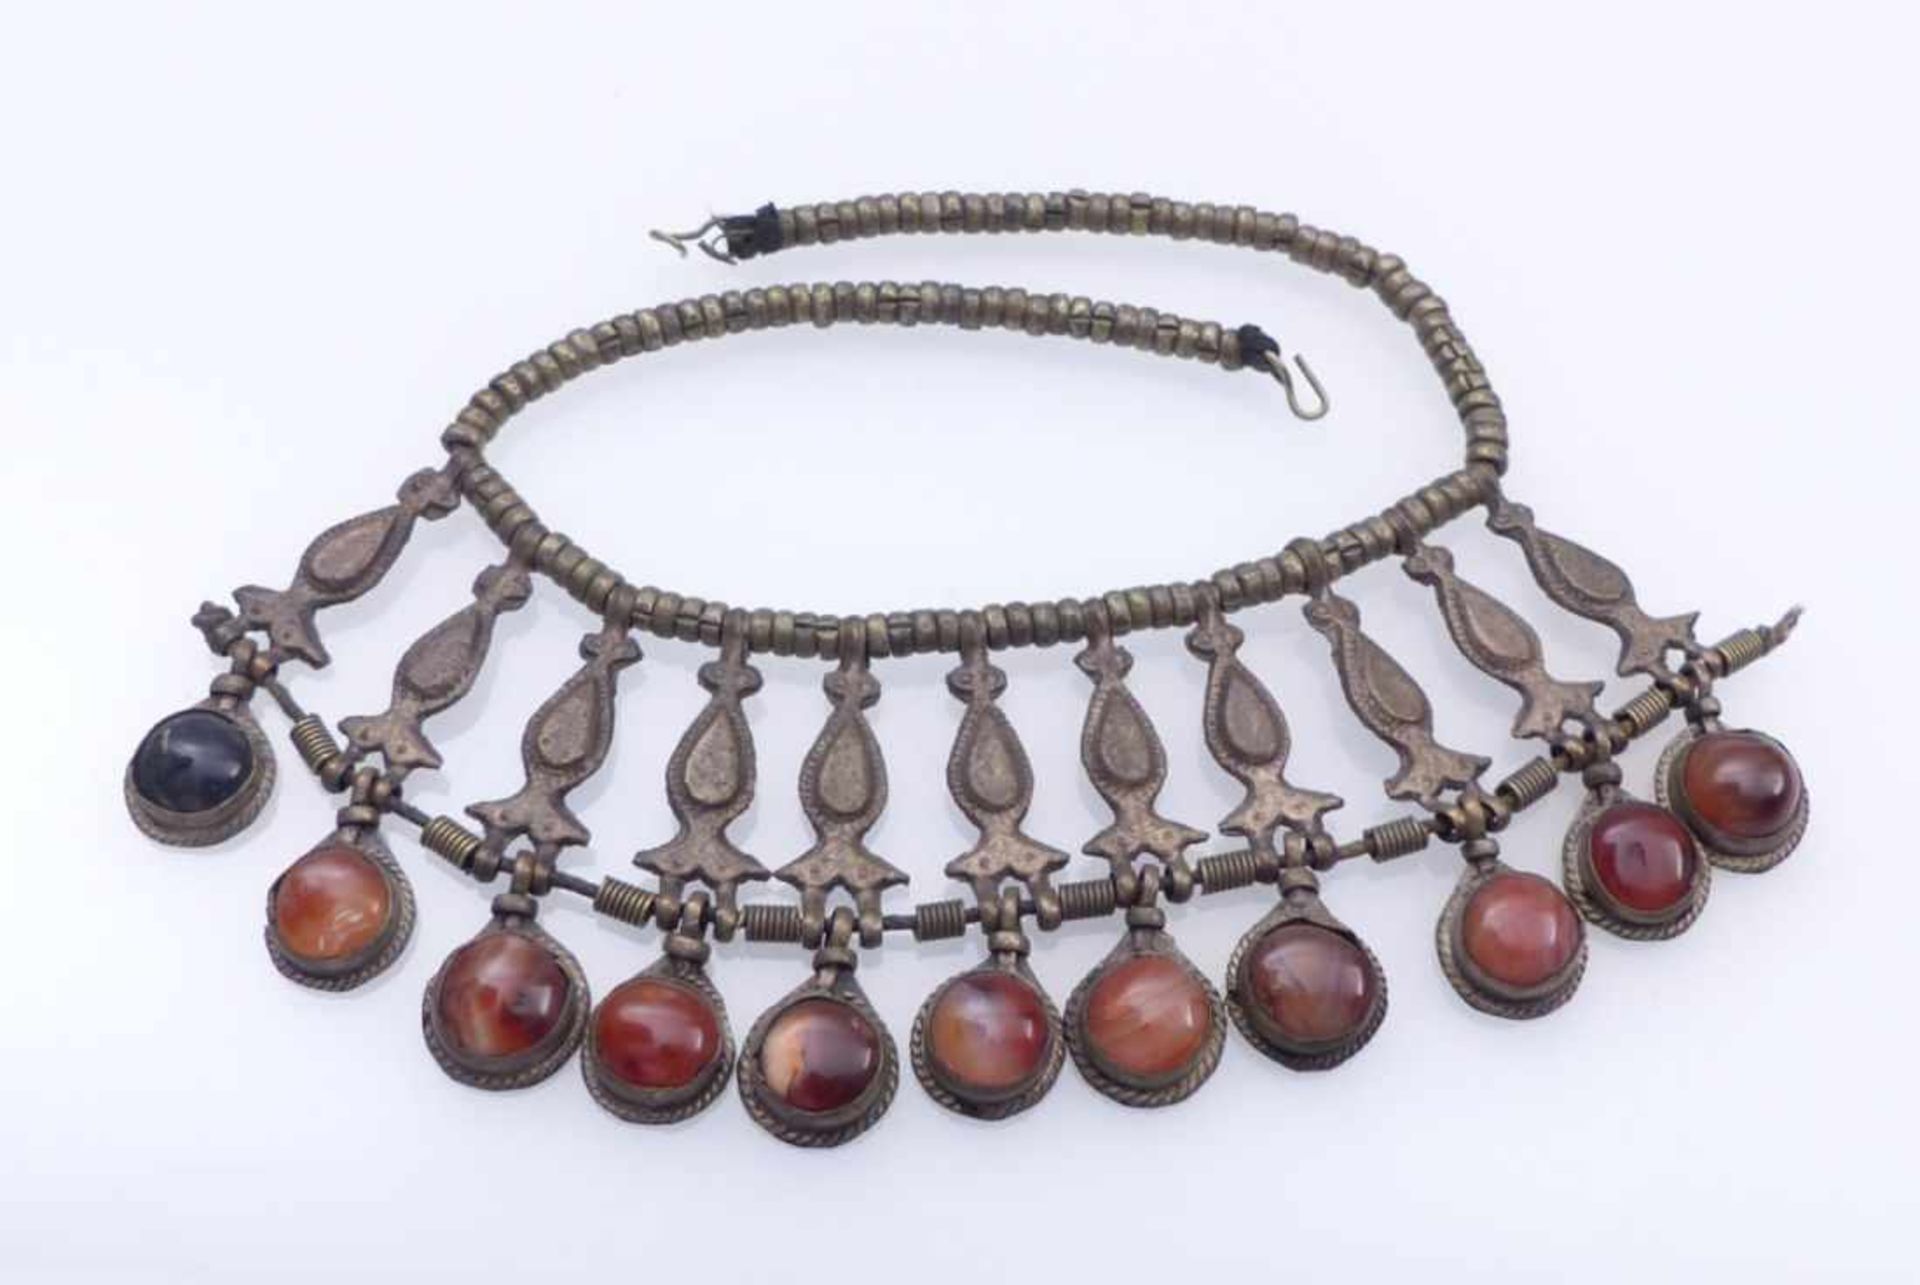 ChainTibetThreaded small rings, 13 drop-shaped elements and hanging striped agate cabochons in